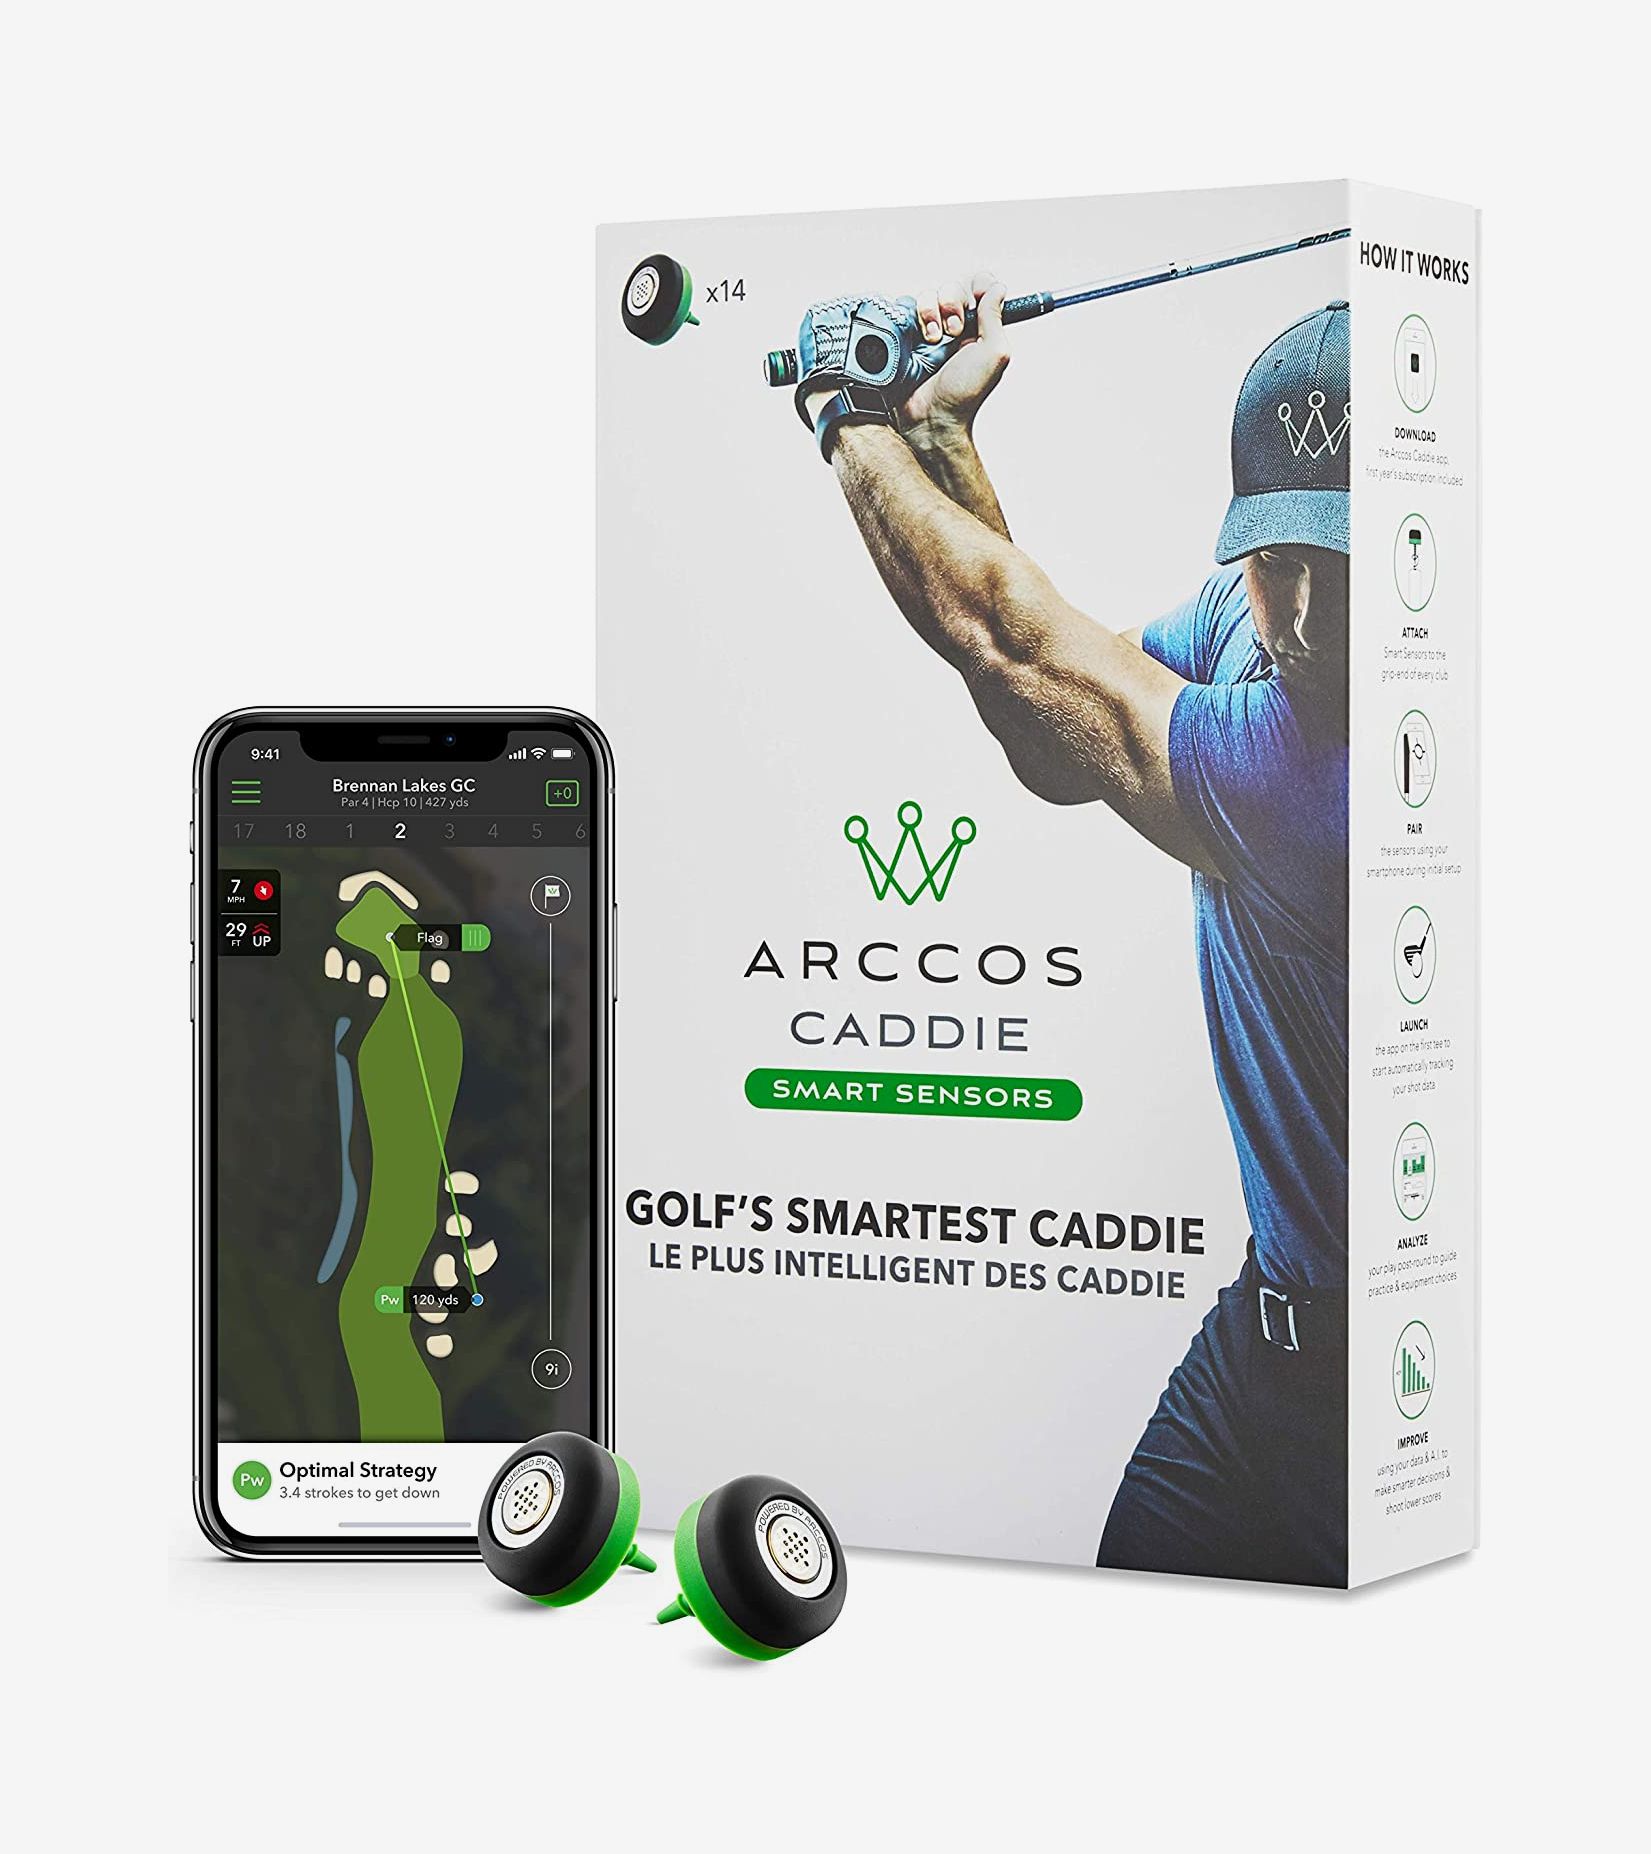 Best golf gifts for the serious golfer